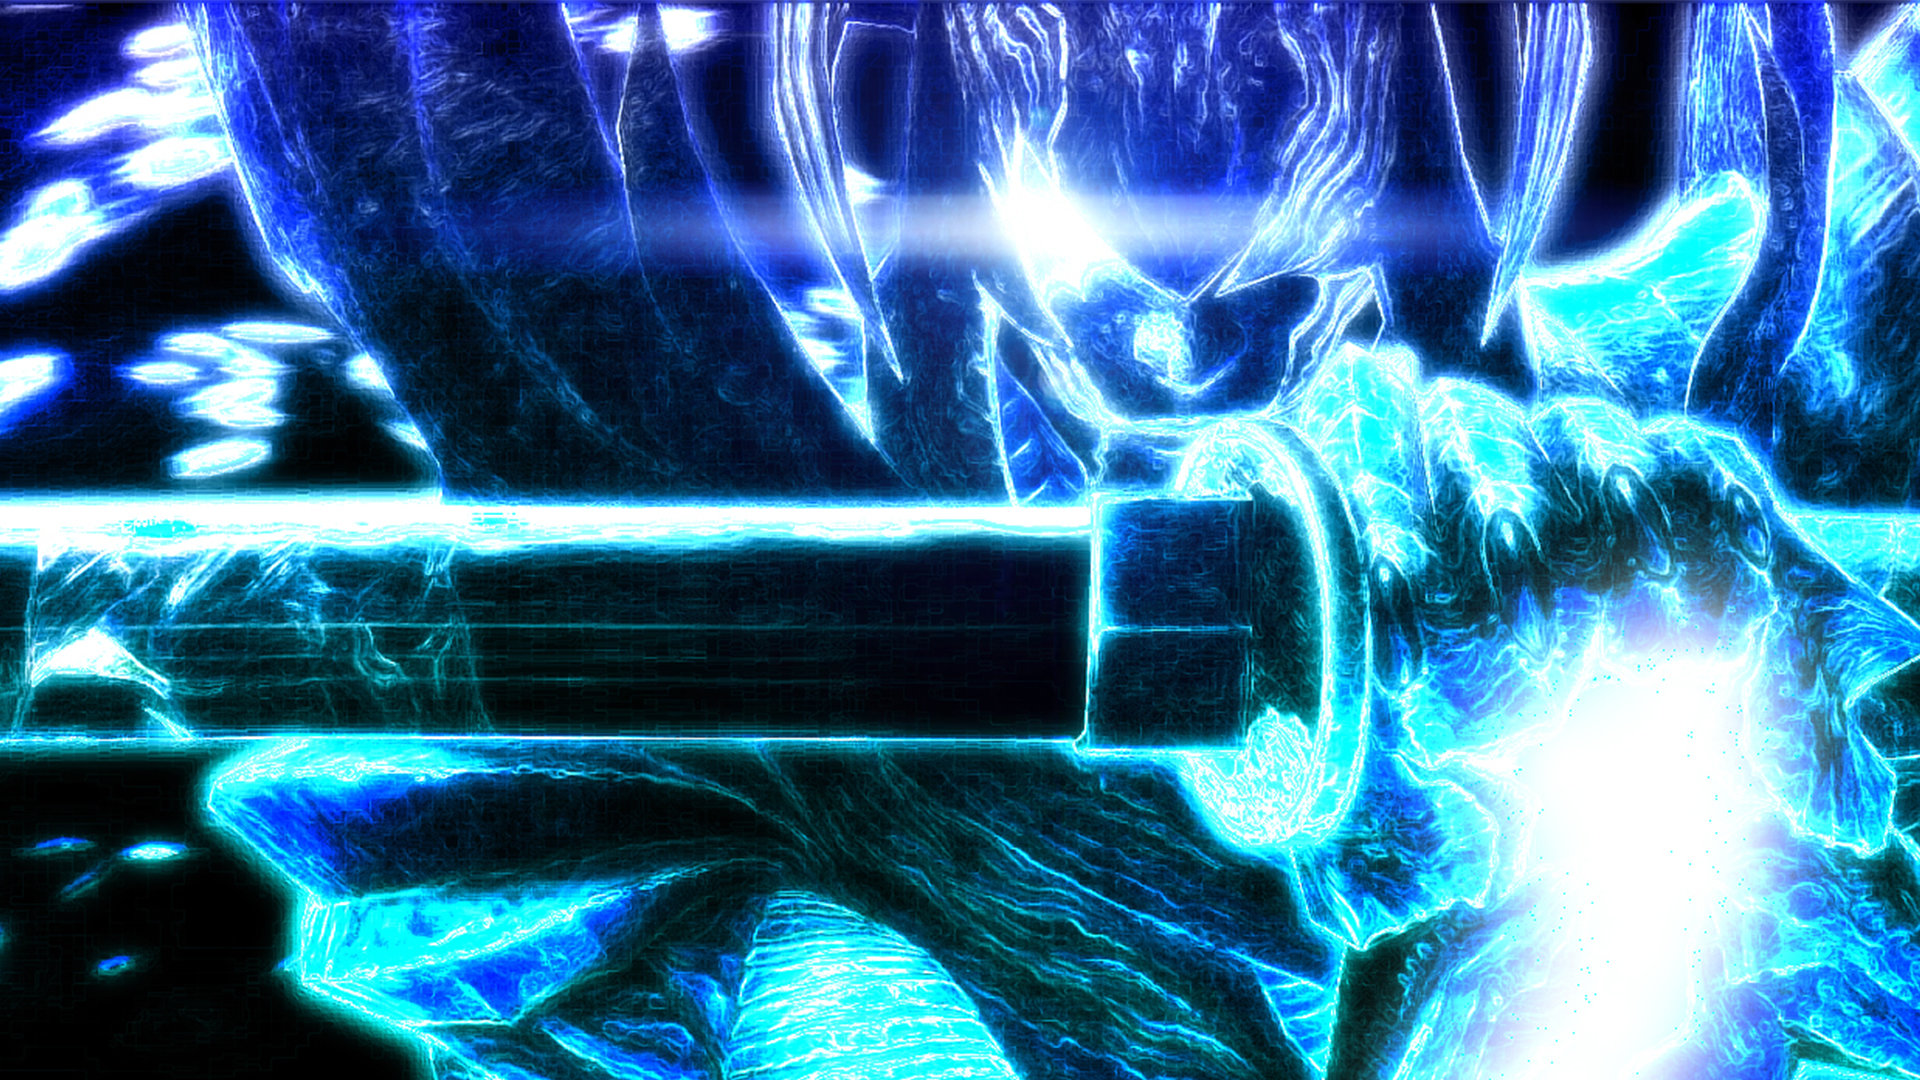 Vergil Devil May Cry Wallpapers Hd For Desktop Backgrounds.